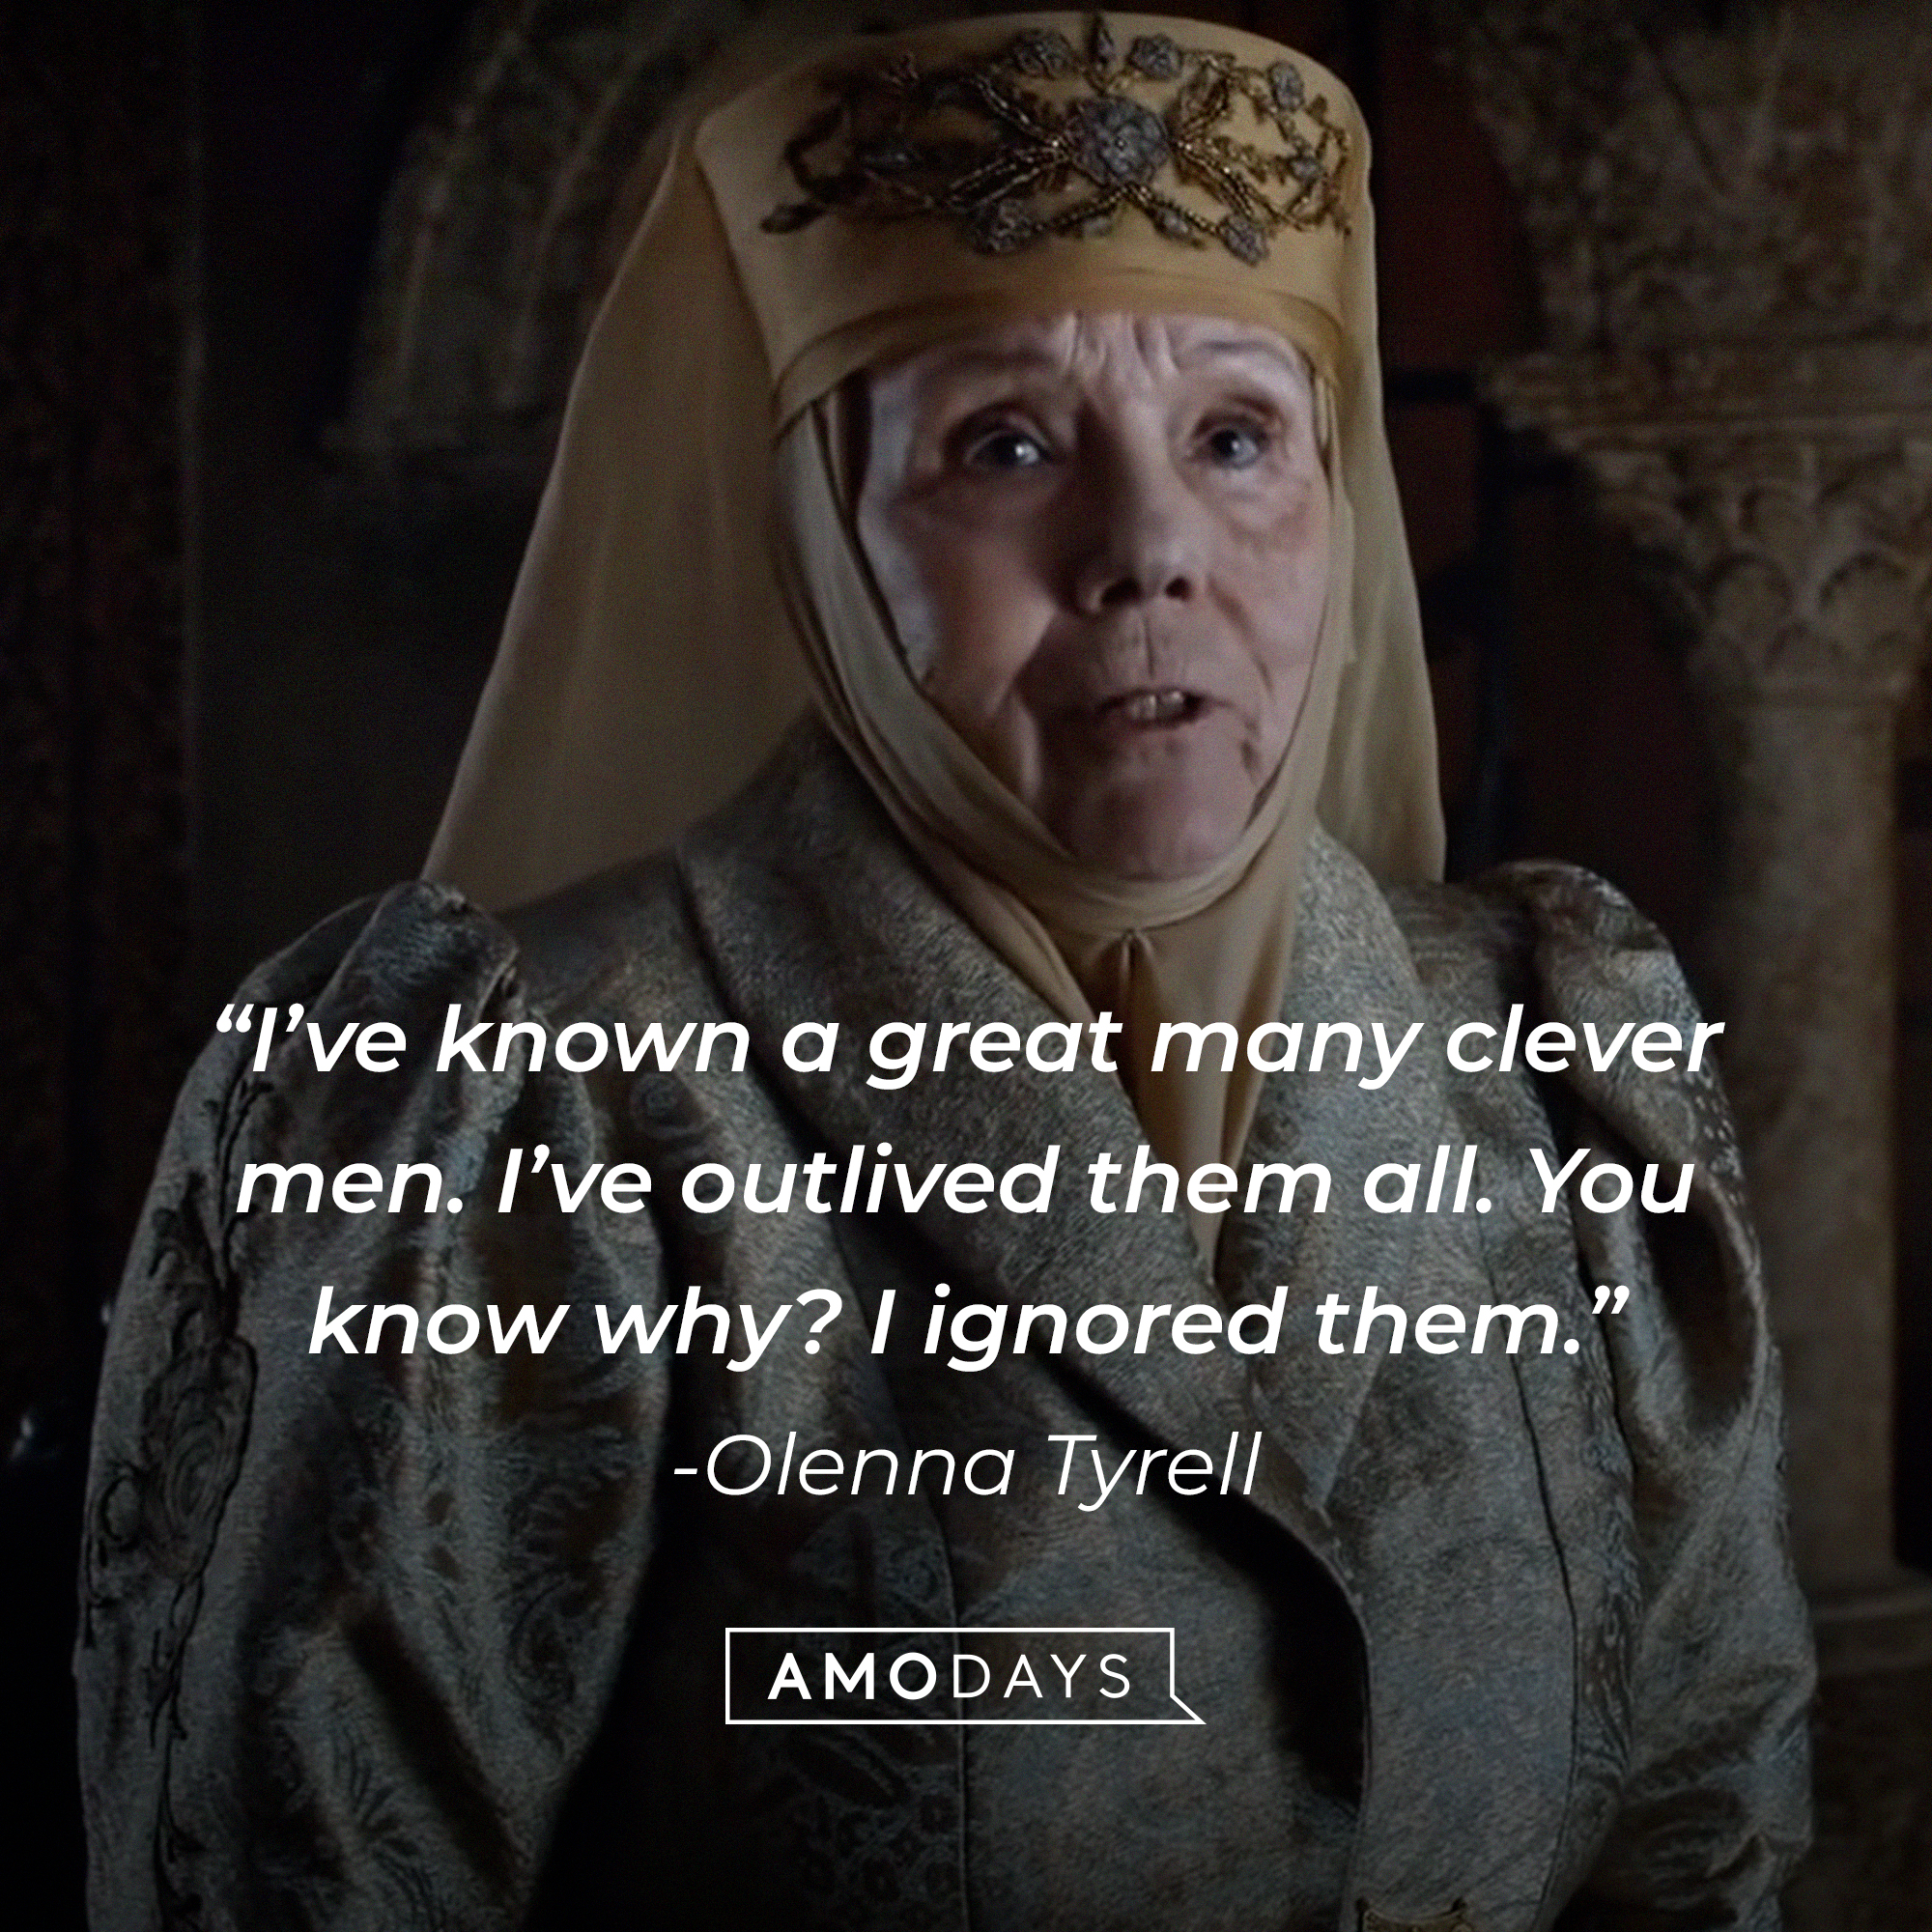 Olenna Tyrell, with her quote: “I’ve known a great many clever men. I’ve outlived them all. You know why? I ignored them.” │Source:  facebook.com/GameOfThrones